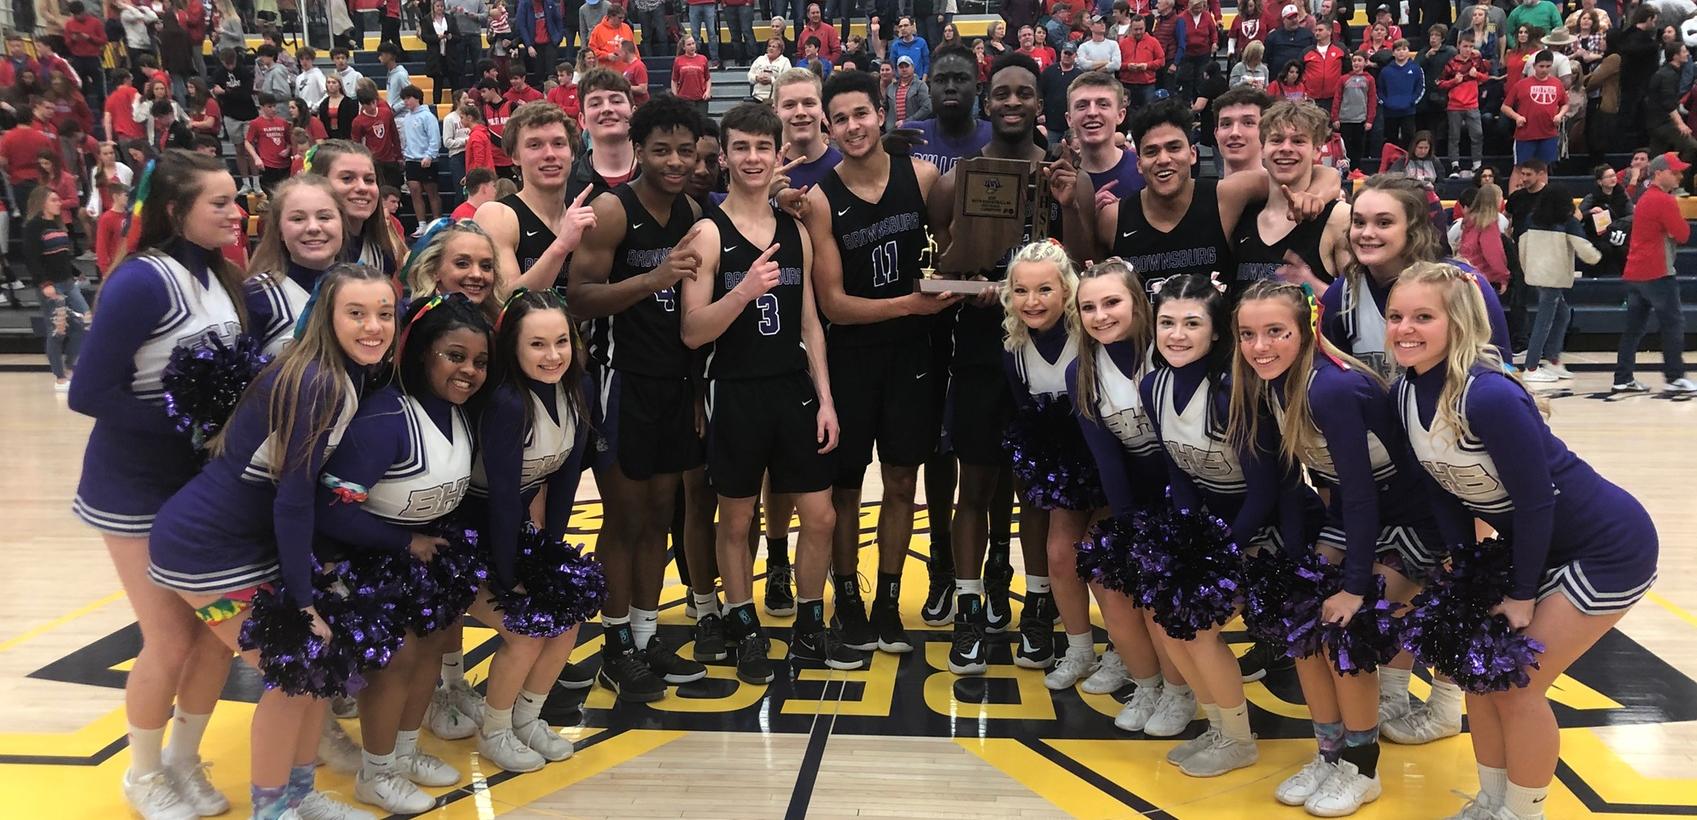 @bhsdogsbhoops Wins 4th Sectional Championship in 7 Years